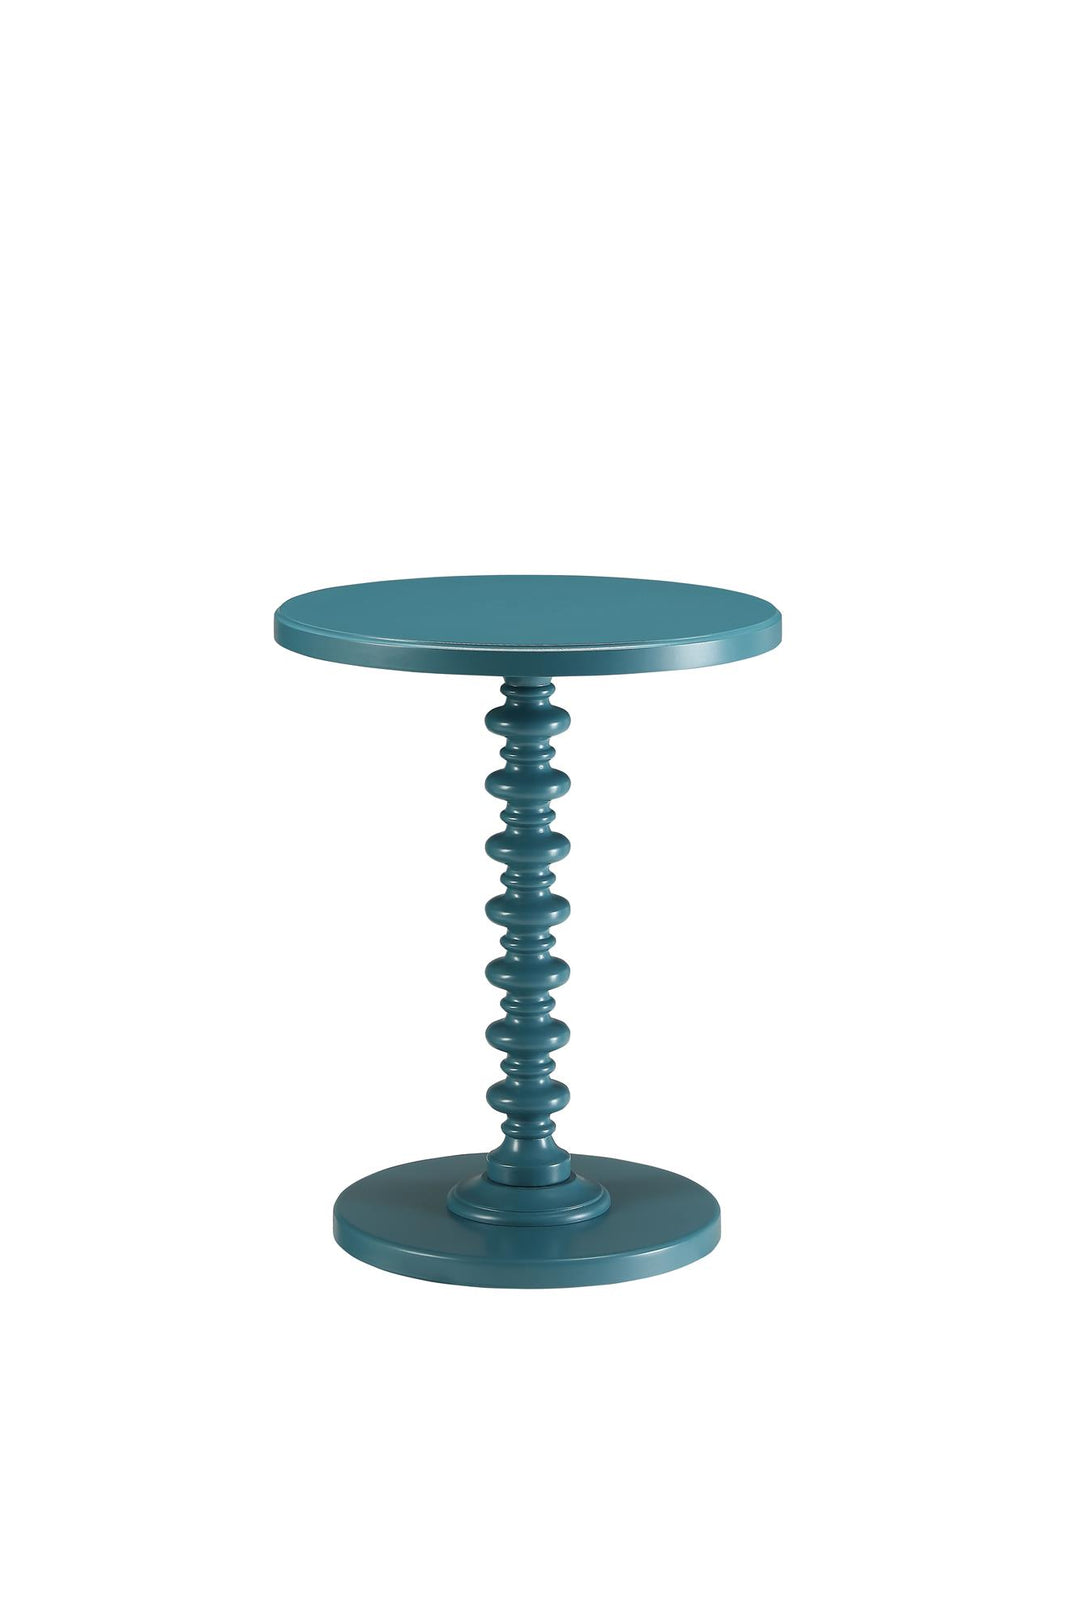 Pedestal Accent Table for bedroom - Teal